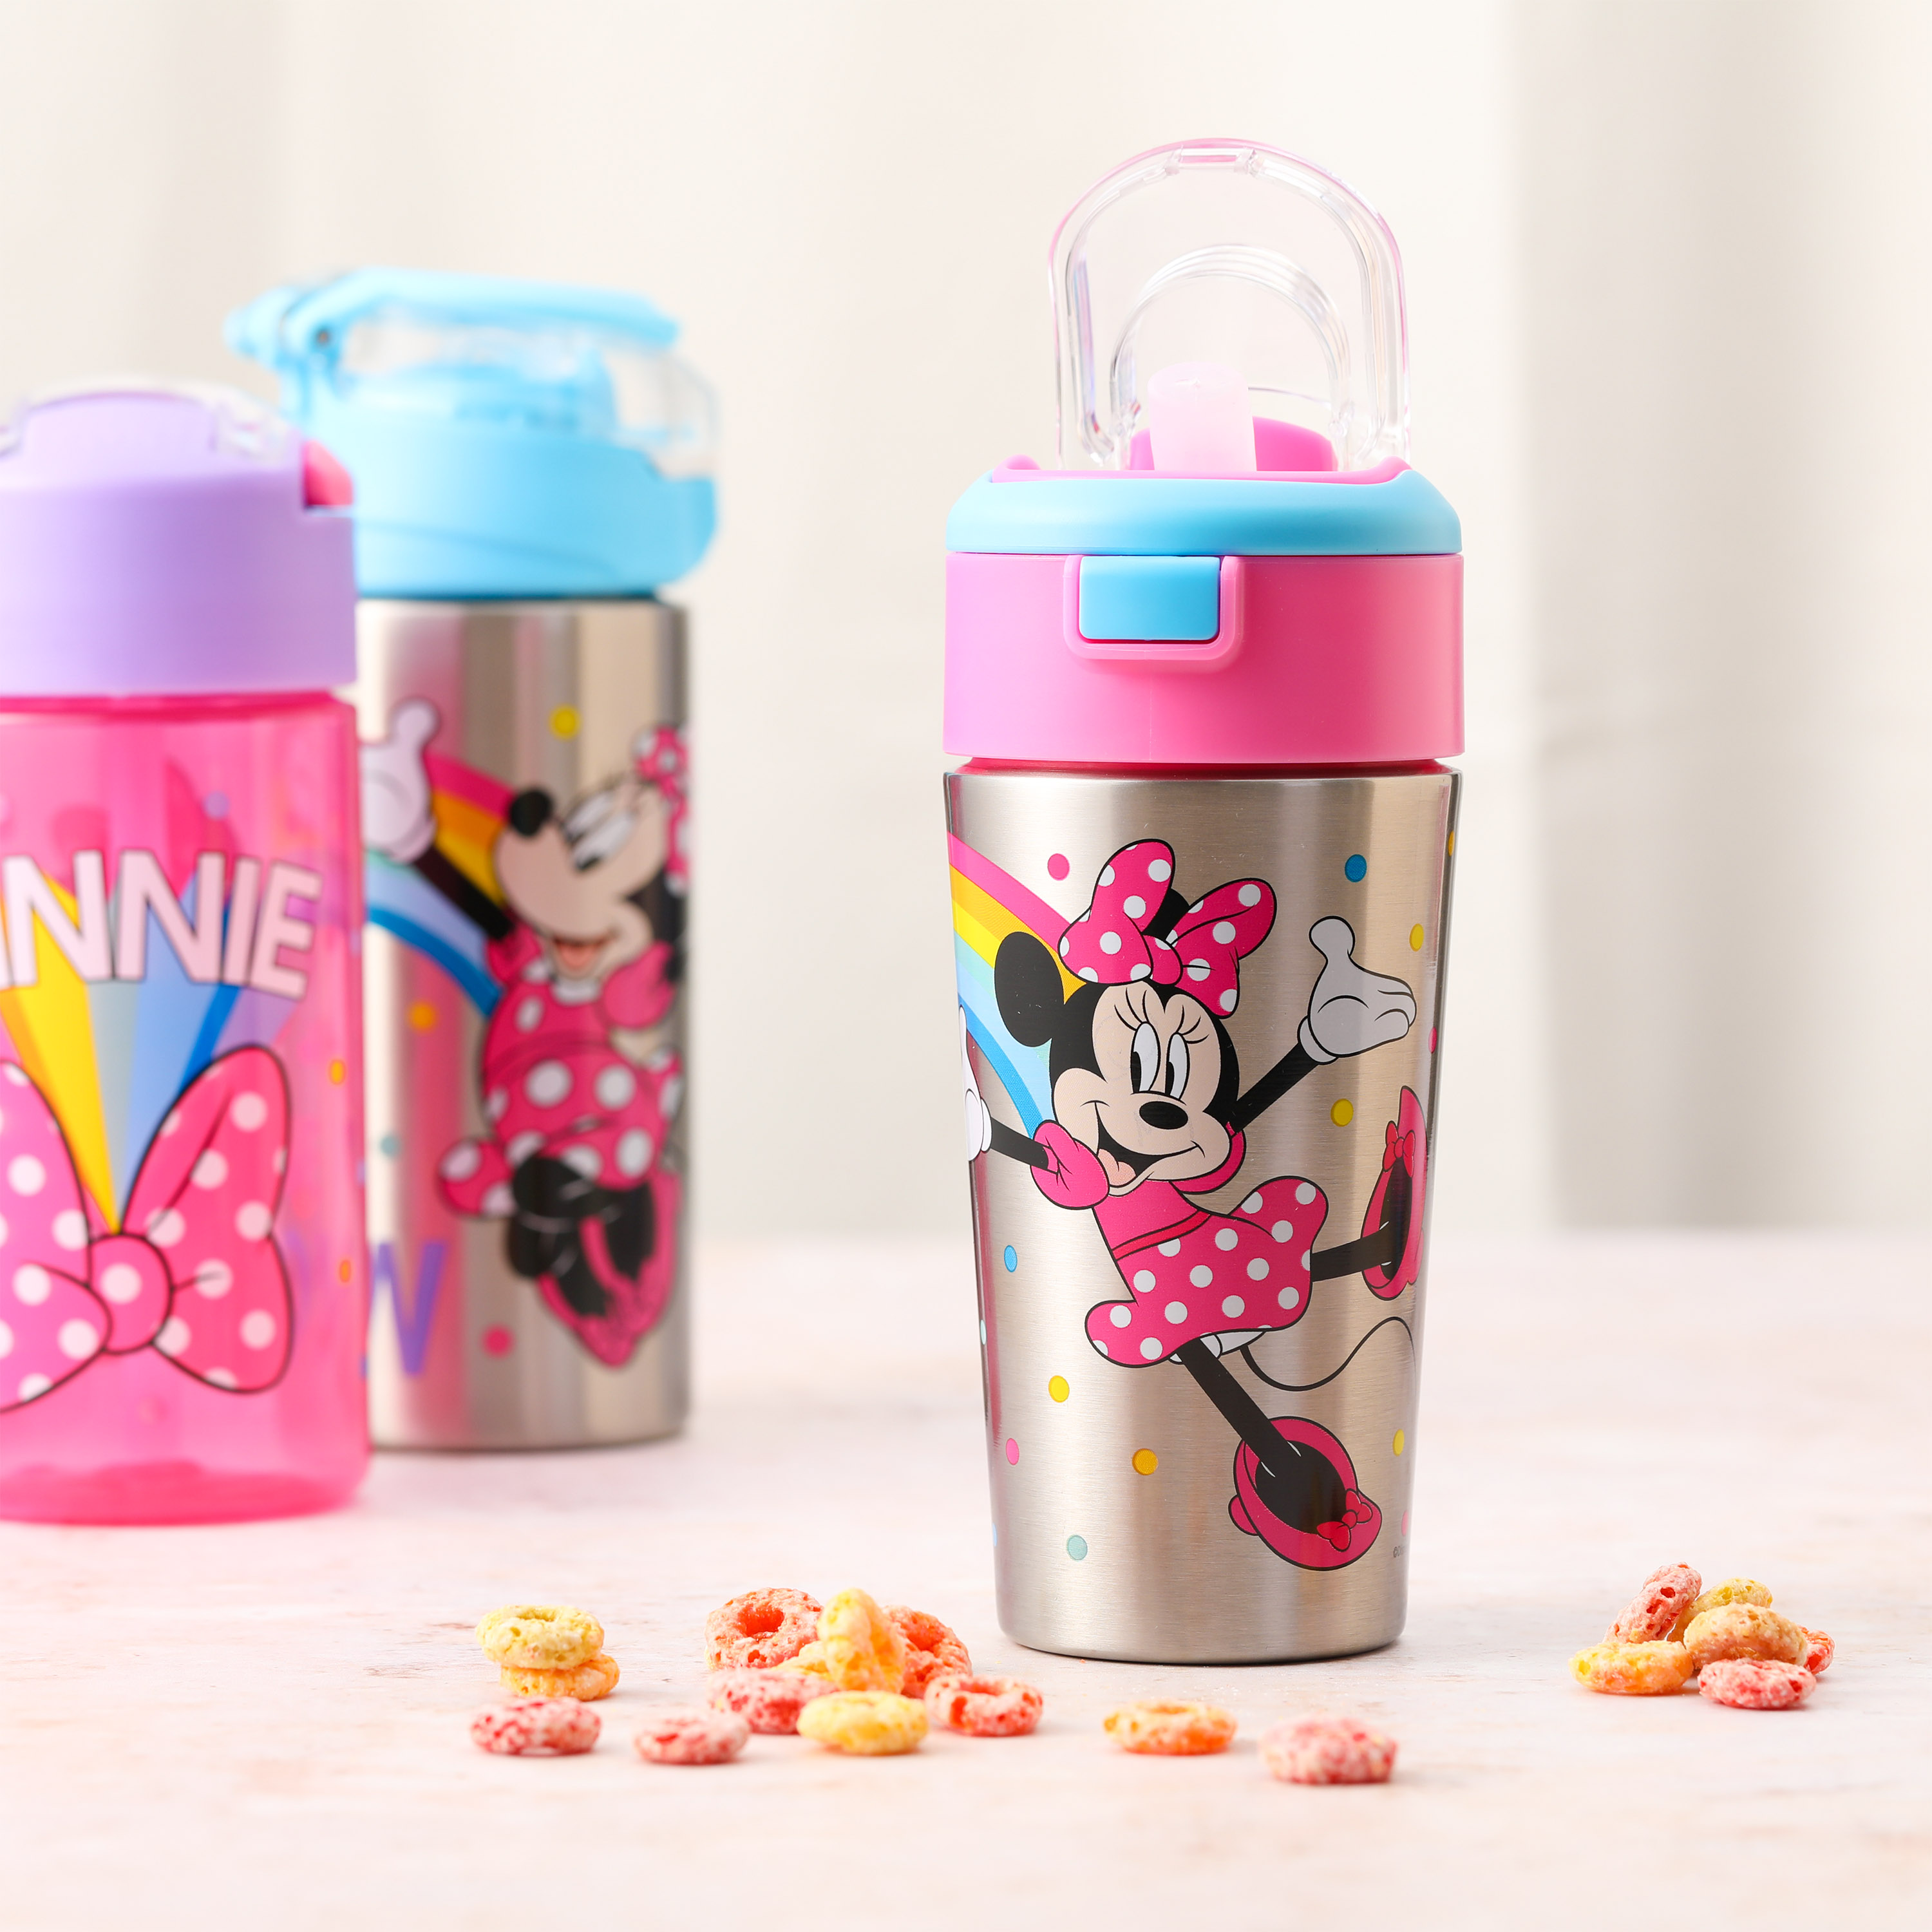 Disney 12 ounce Vacuum Insulated Reusable Stainless Steel Water Bottle, Minnie Mouse slideshow image 2